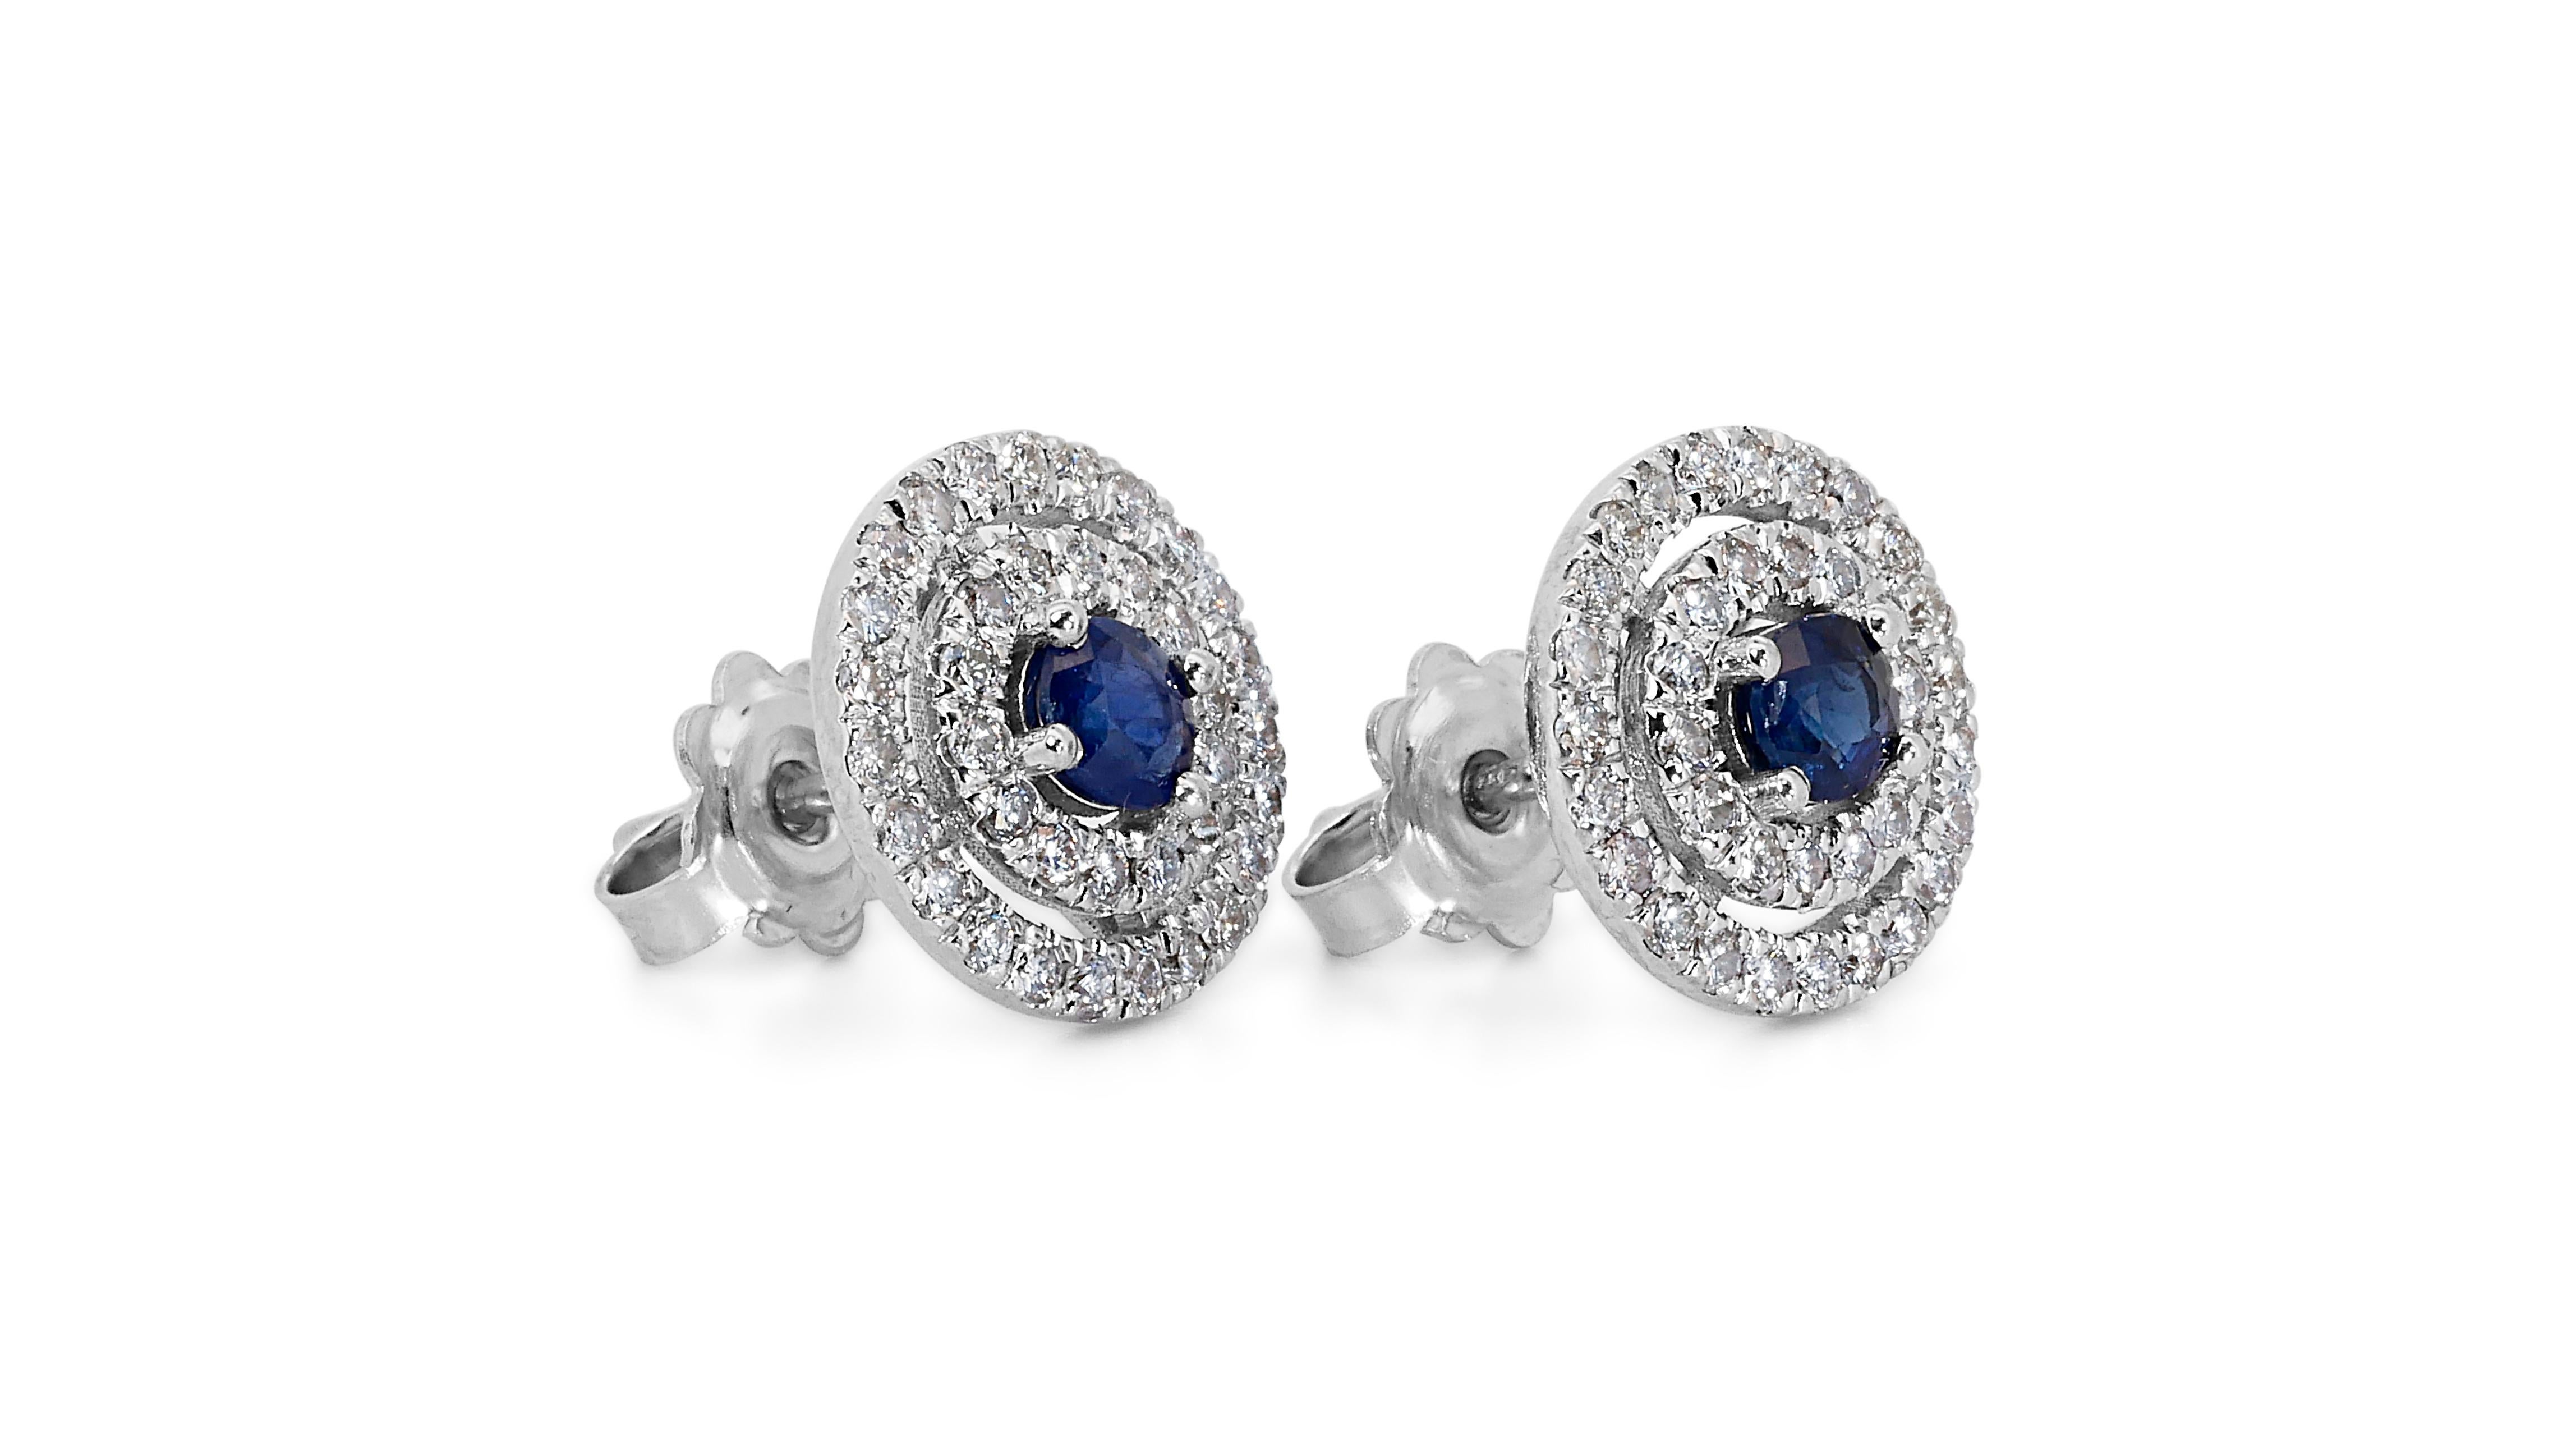 18k White Gold Earrings w/ 1.68ct Sapphire and Natural Diamonds IGI Certificate In New Condition For Sale In רמת גן, IL